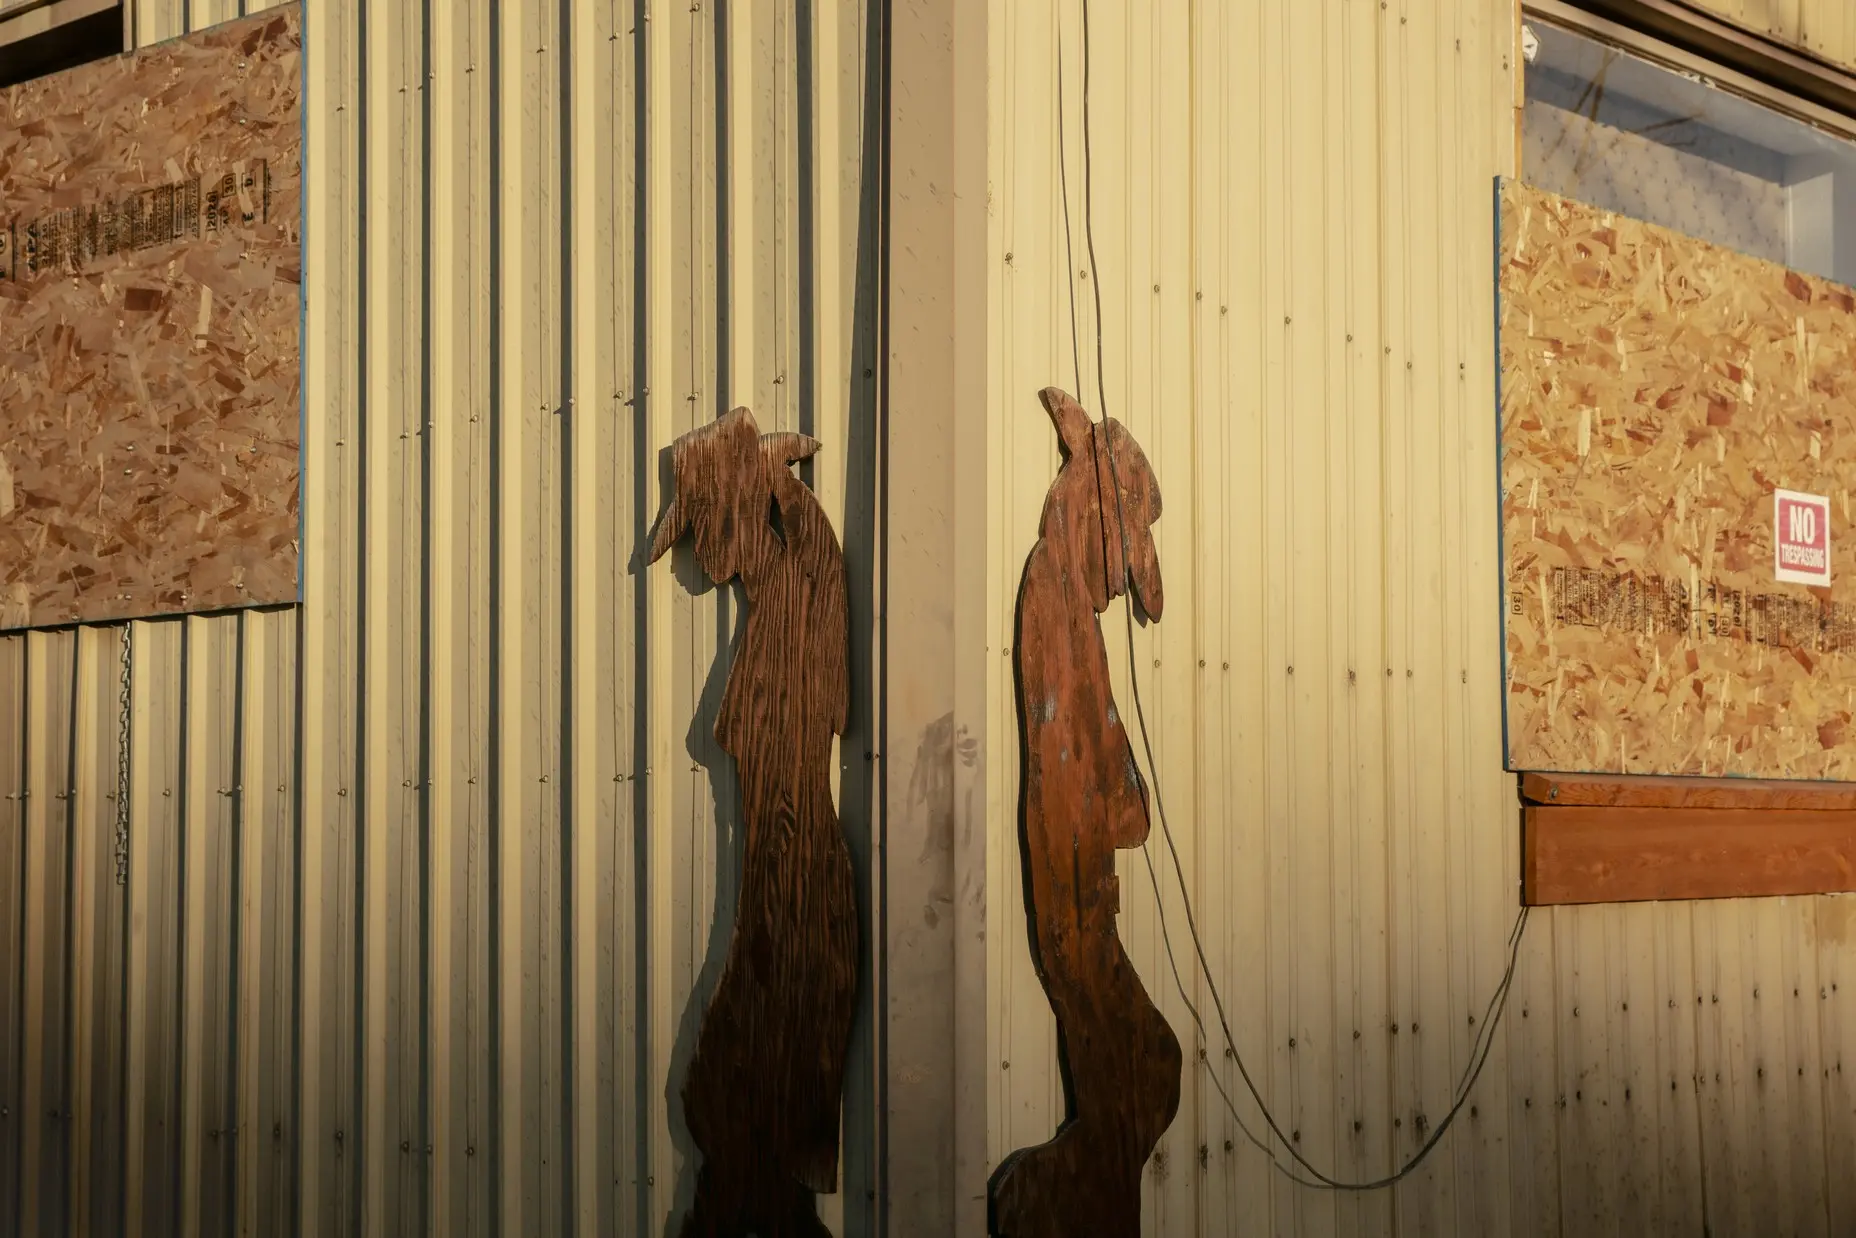 Cowboy wood figures cut from plywood are nailed to a boarded up building in Hines, Oregon